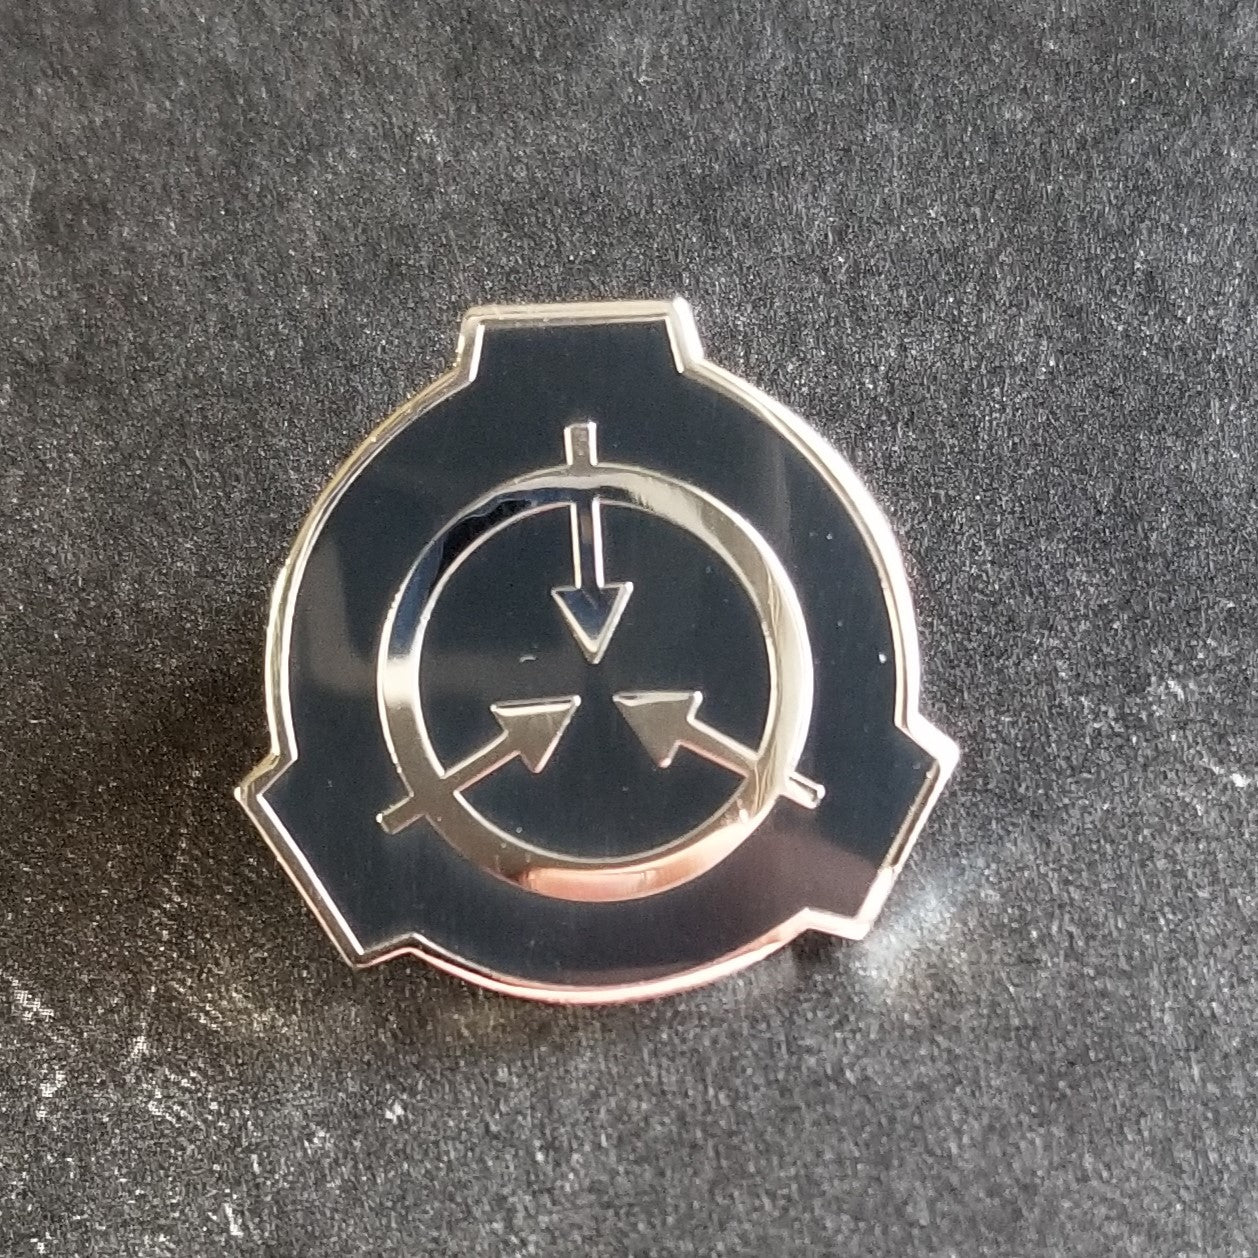 SCP Foundation Badge [SCP Foundation] Button